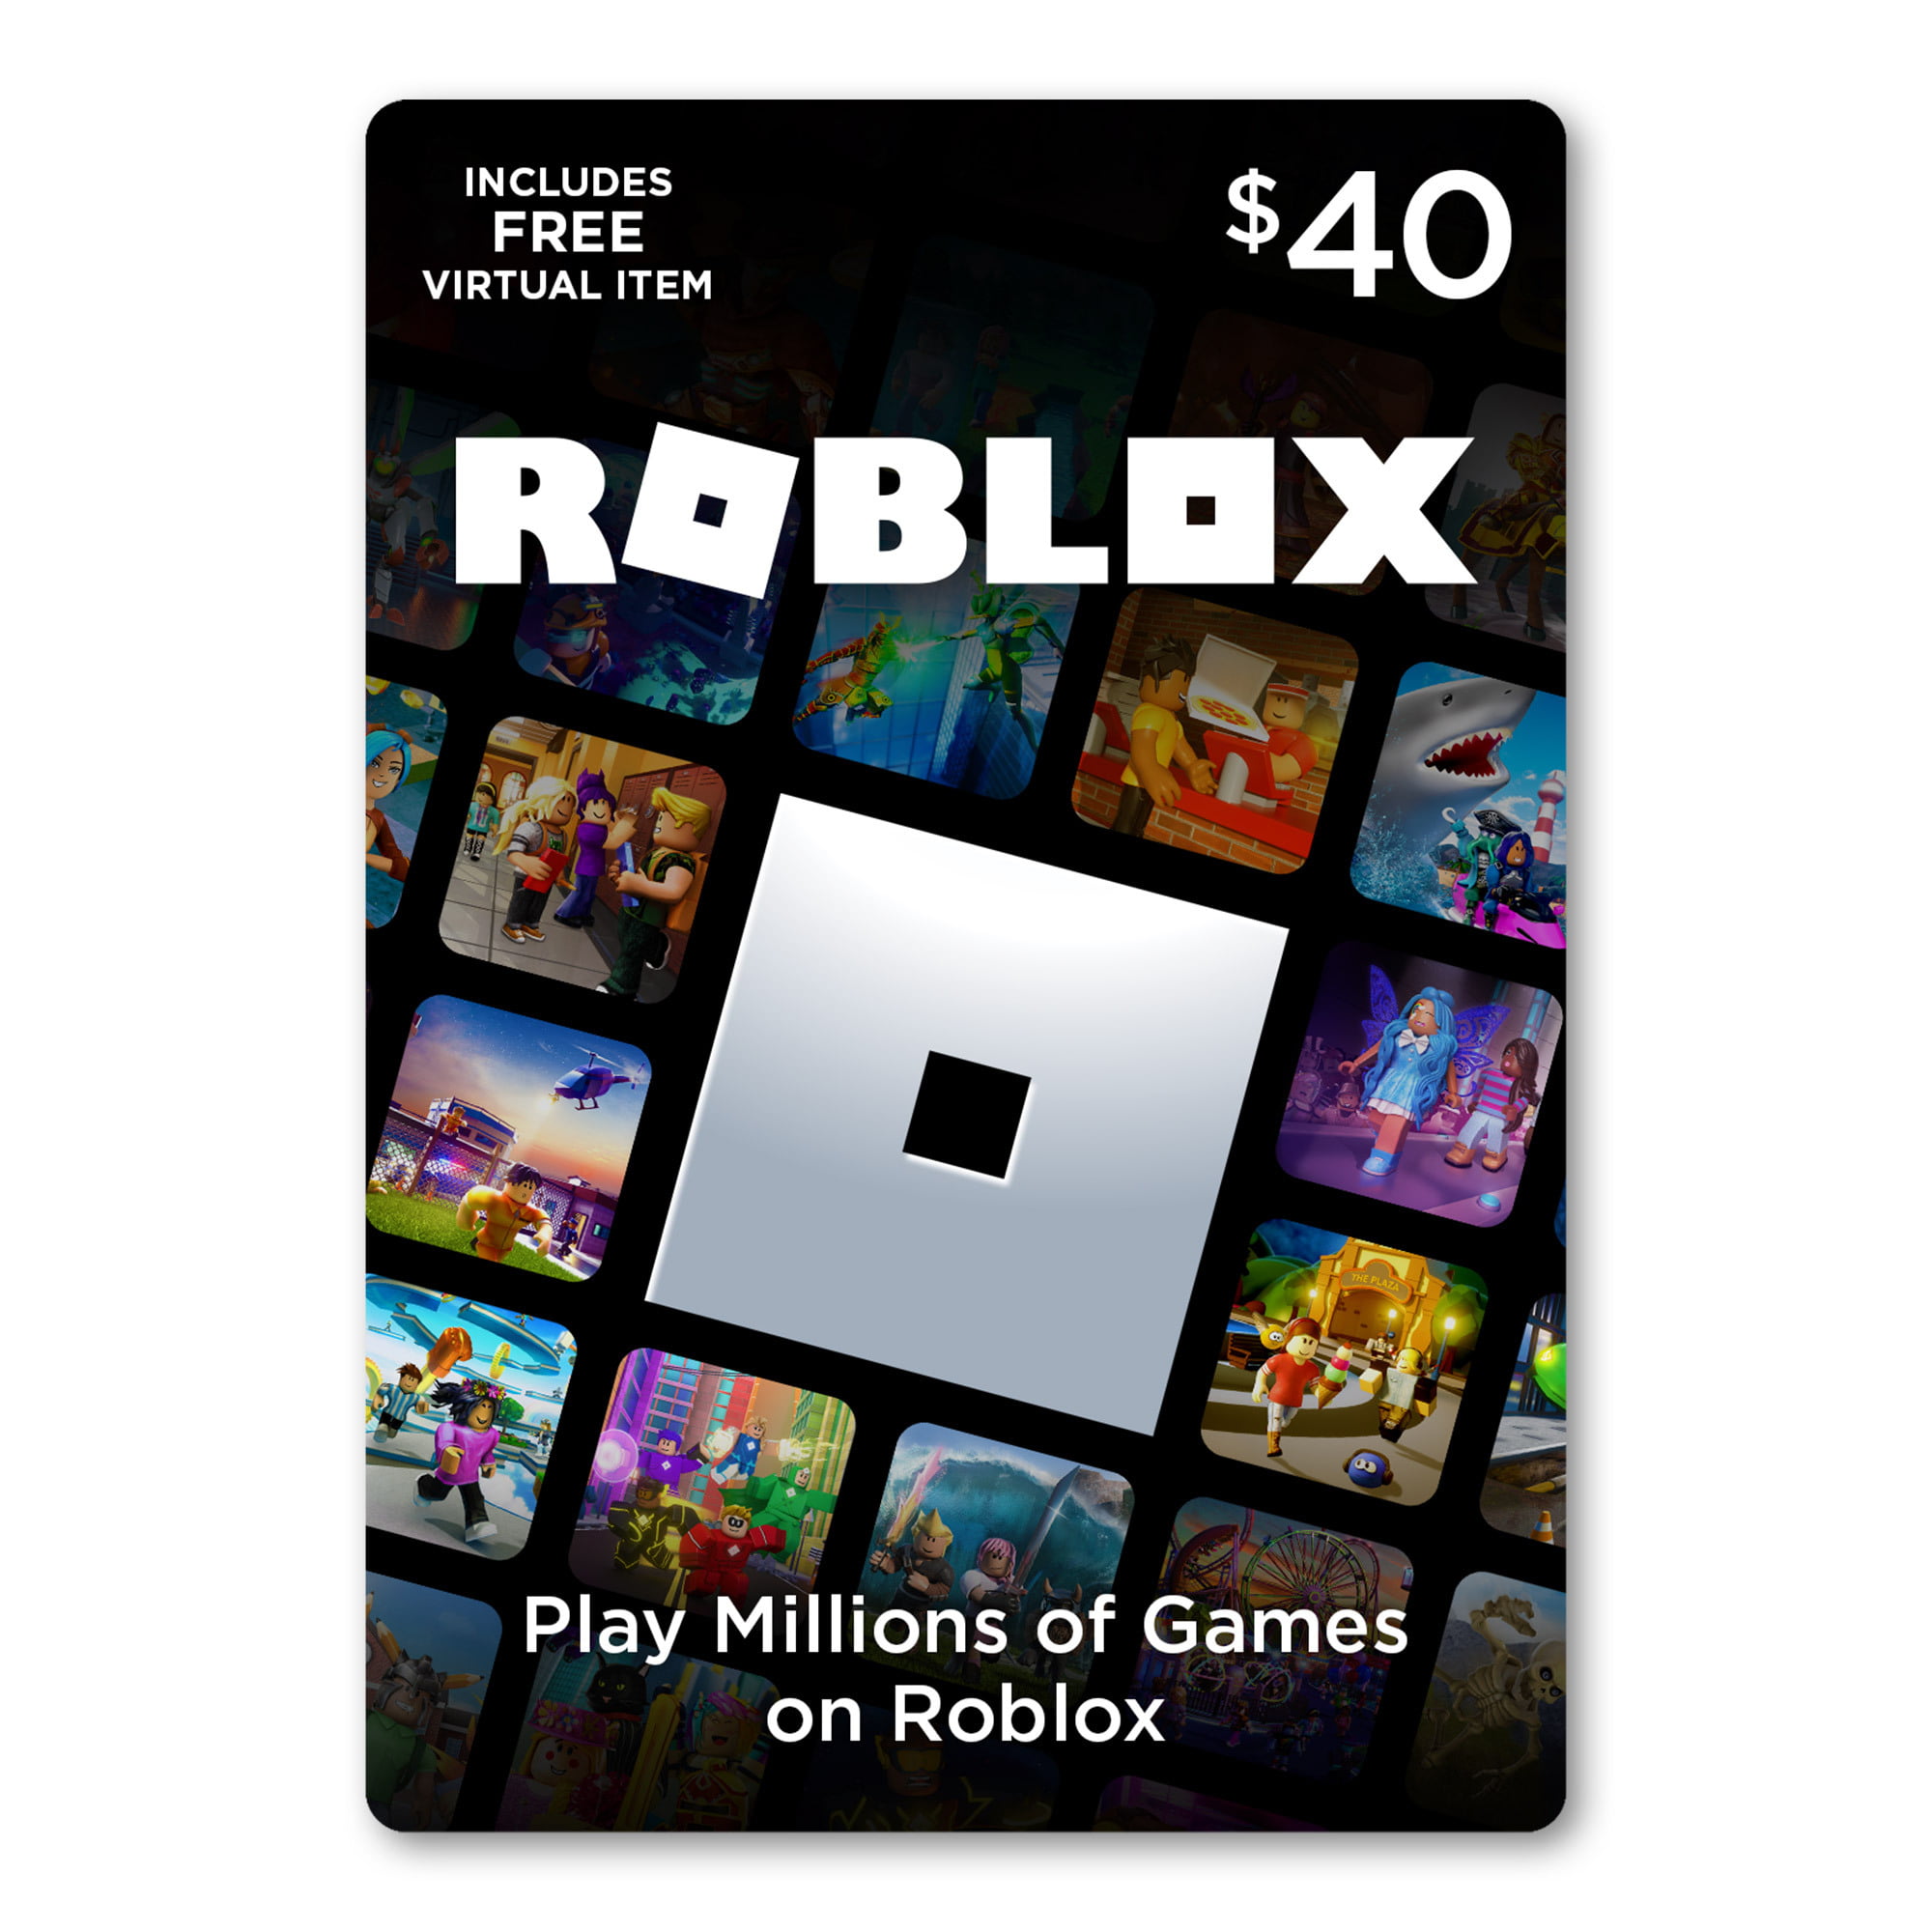 Roblox 40 Digital Gift Card Includes Exclusive Virtual Item Digital Download Walmart Com Walmart Com - how much robux does a 40 dollar card give